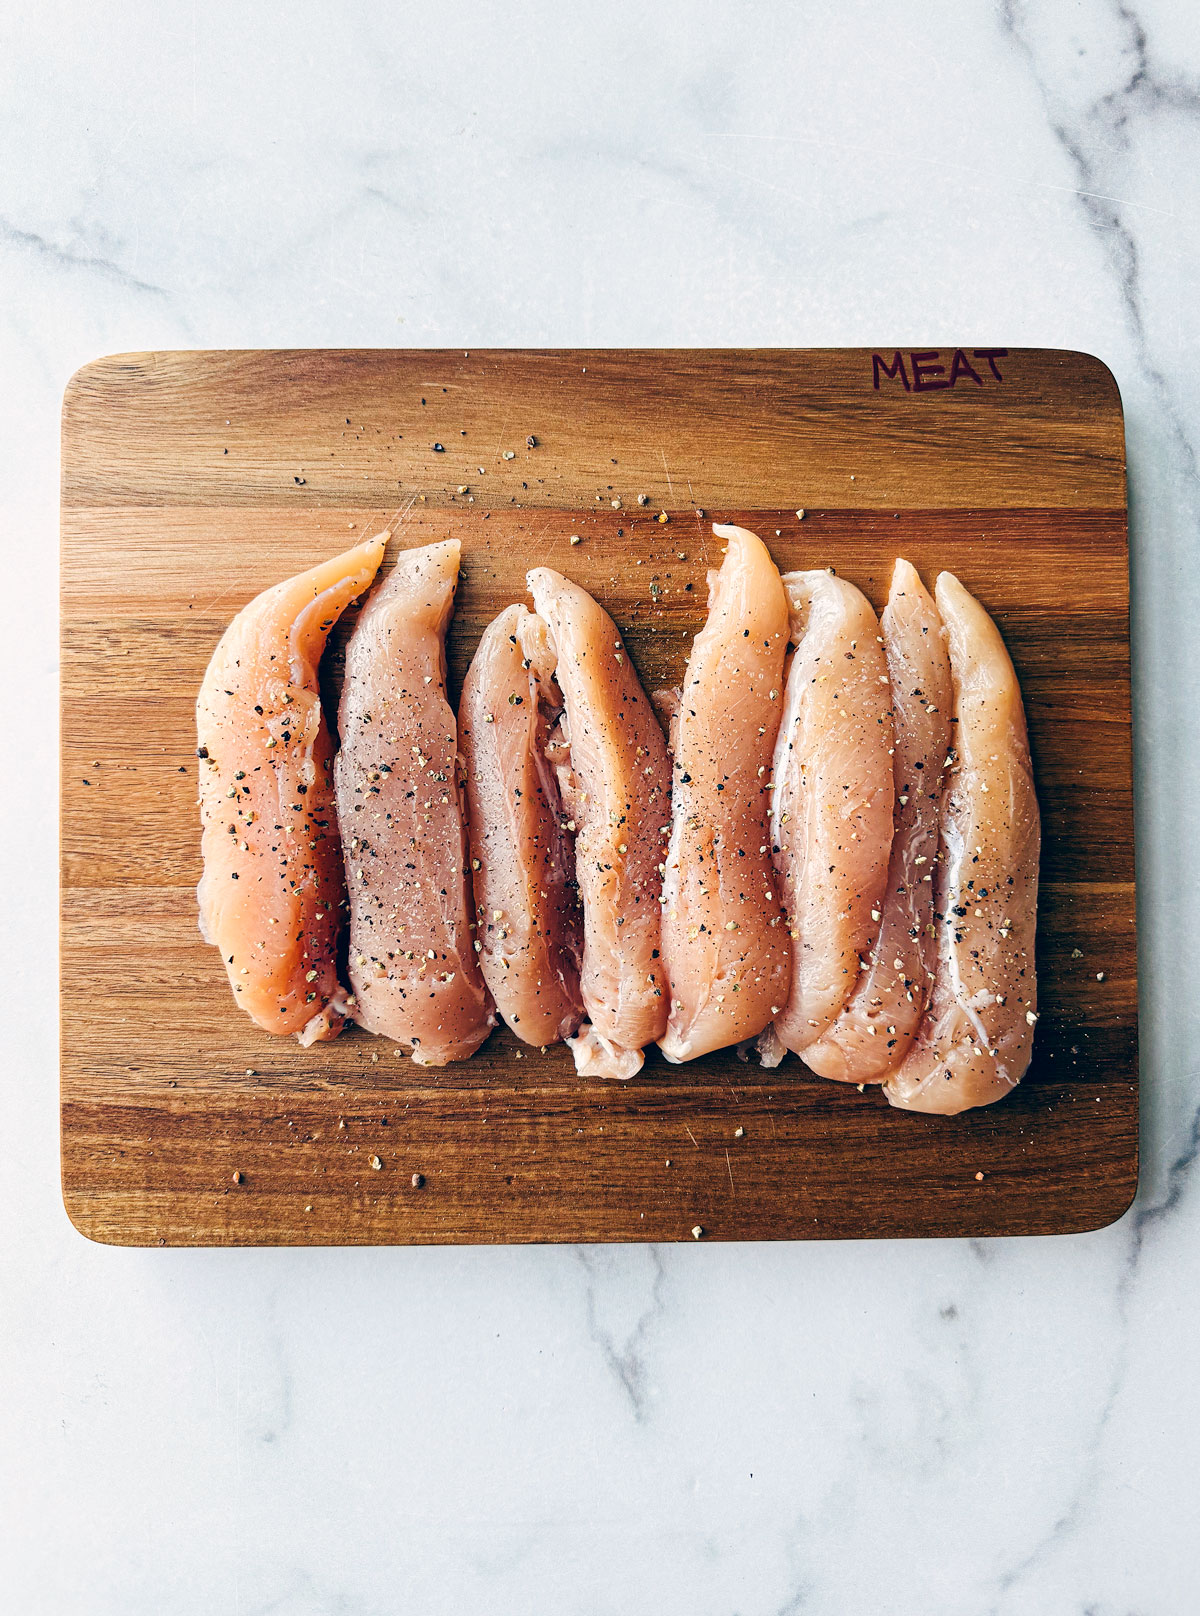 Wooden cutting board with uncooked chicken tenderloins on it.